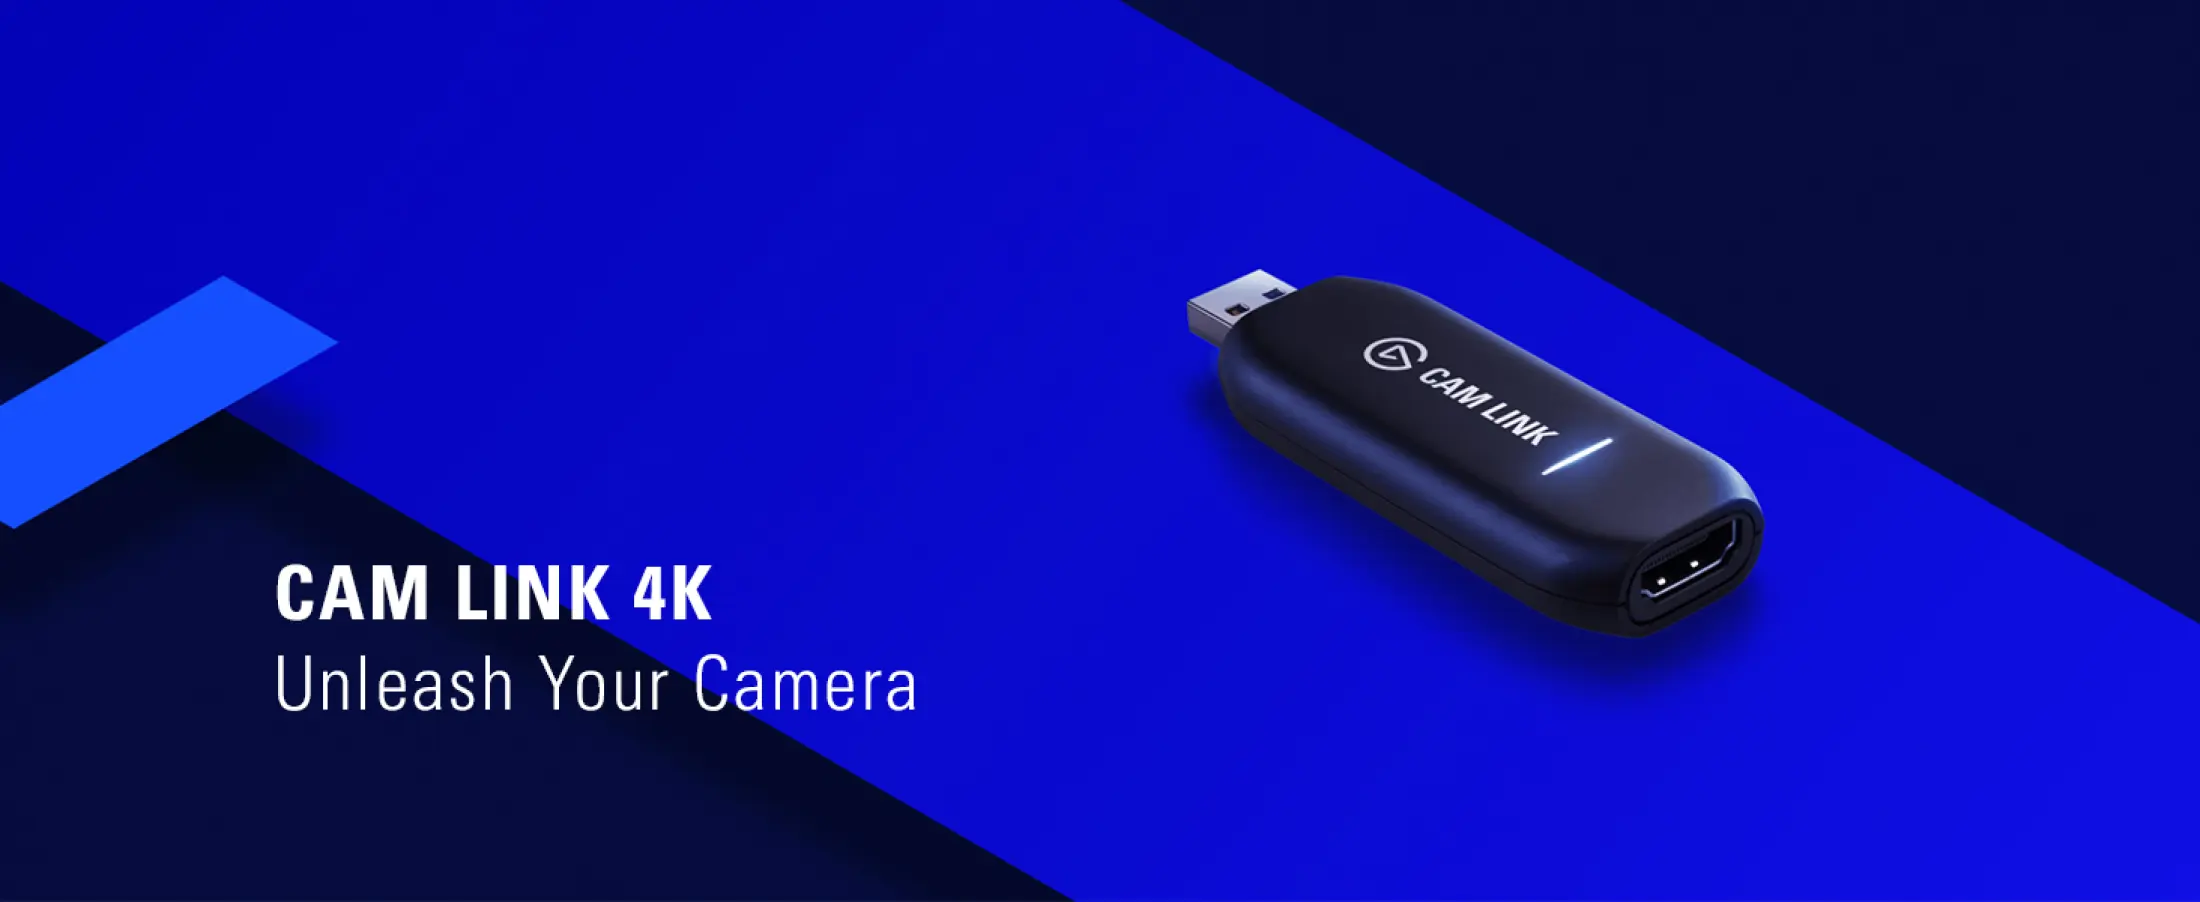 On Hand Elgato Cam Link 4k Hdmi Capture Device 1080p60 4k At 30fps Live Streaming Webcam Compact Usb3 0 Lazada Ph